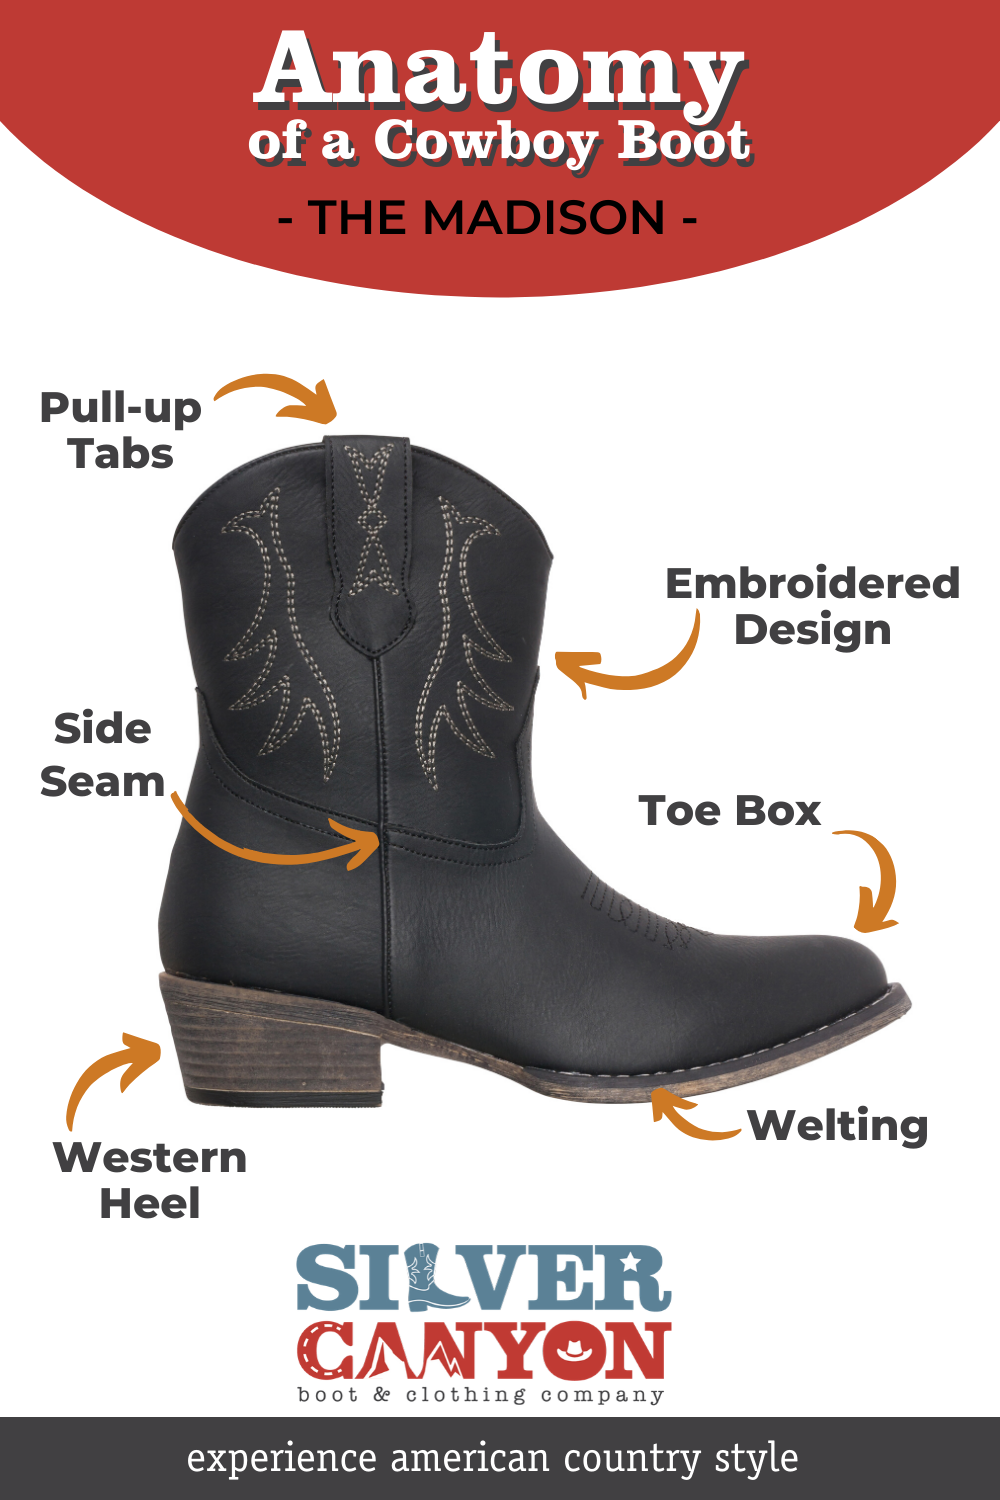 Anatomy of a Cowboy Boot - INSP TV